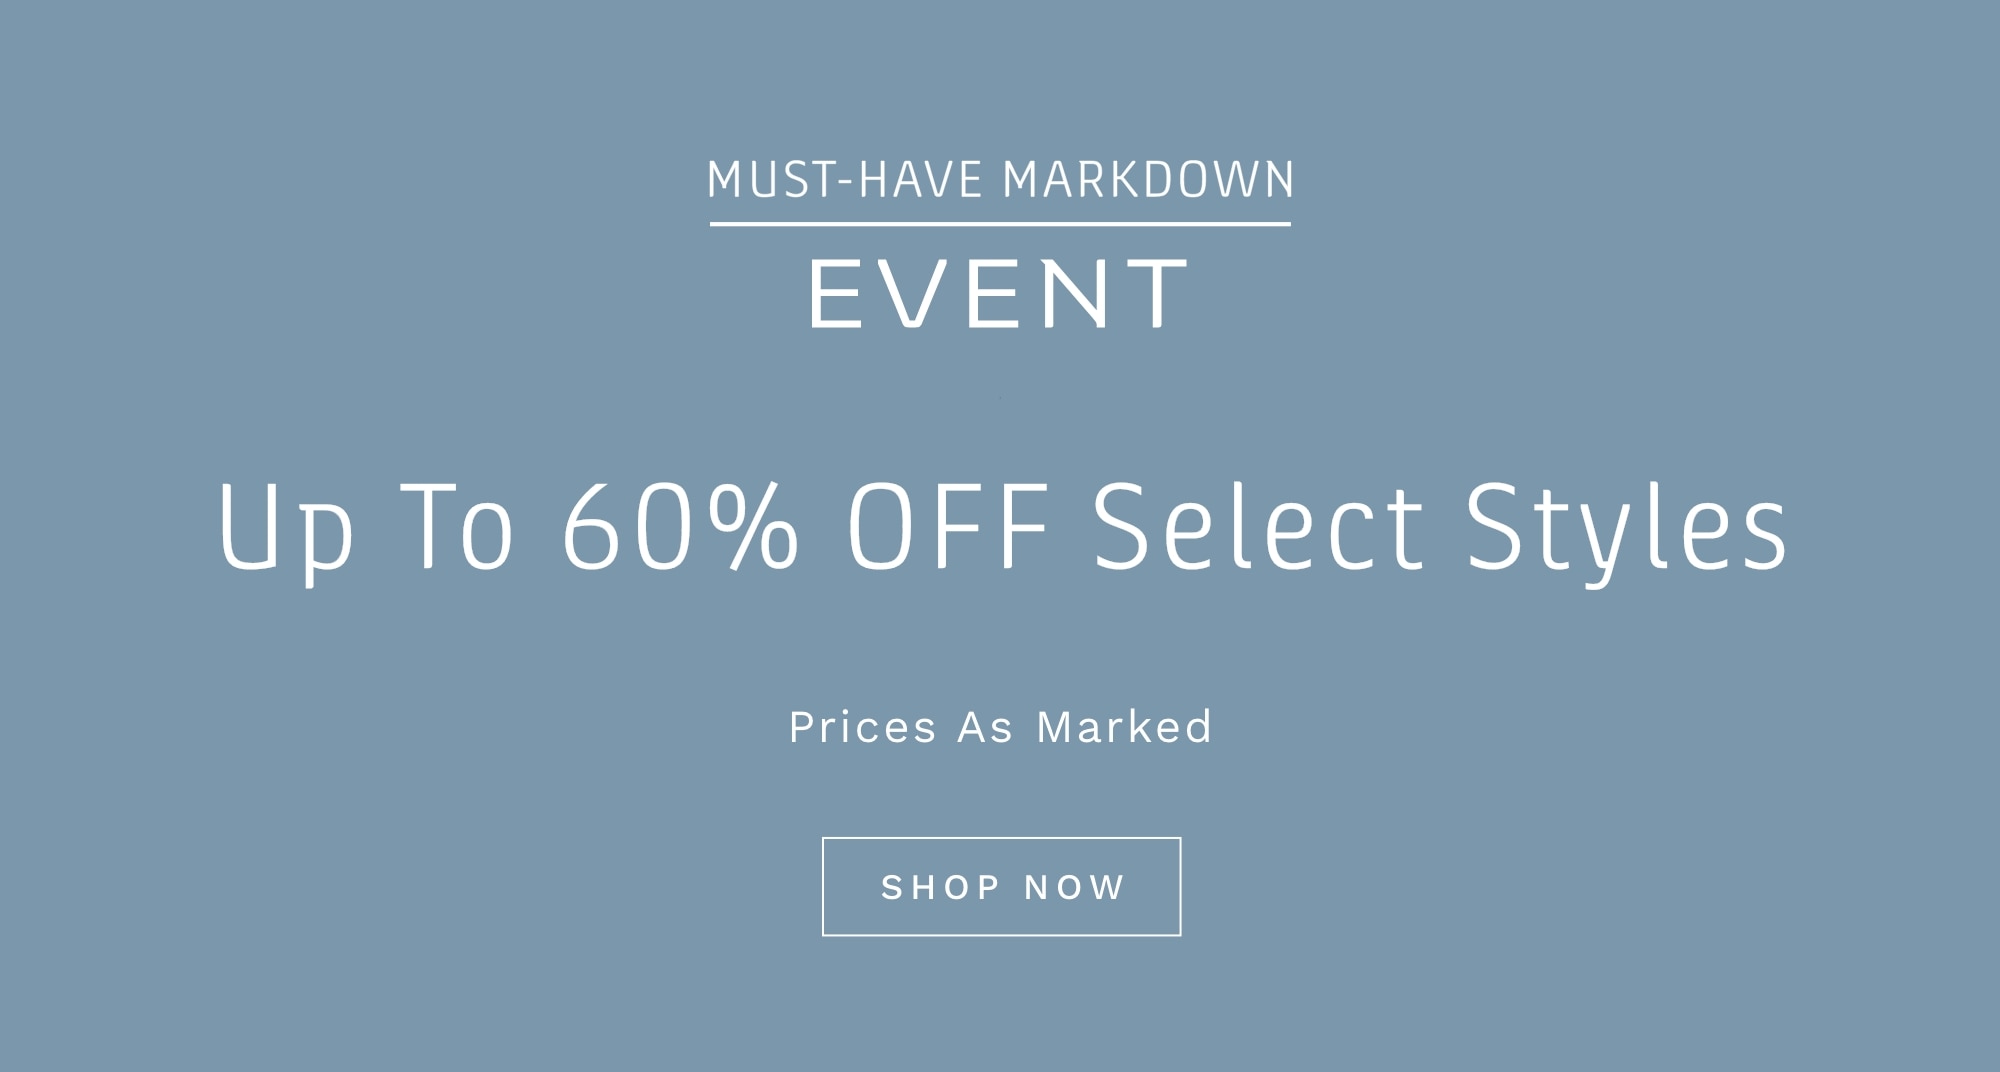 MUST-HAVE MARKDOWN EVENT UP TO 60% OFF SELECT STYLES Prices as Marked SHOP NOW